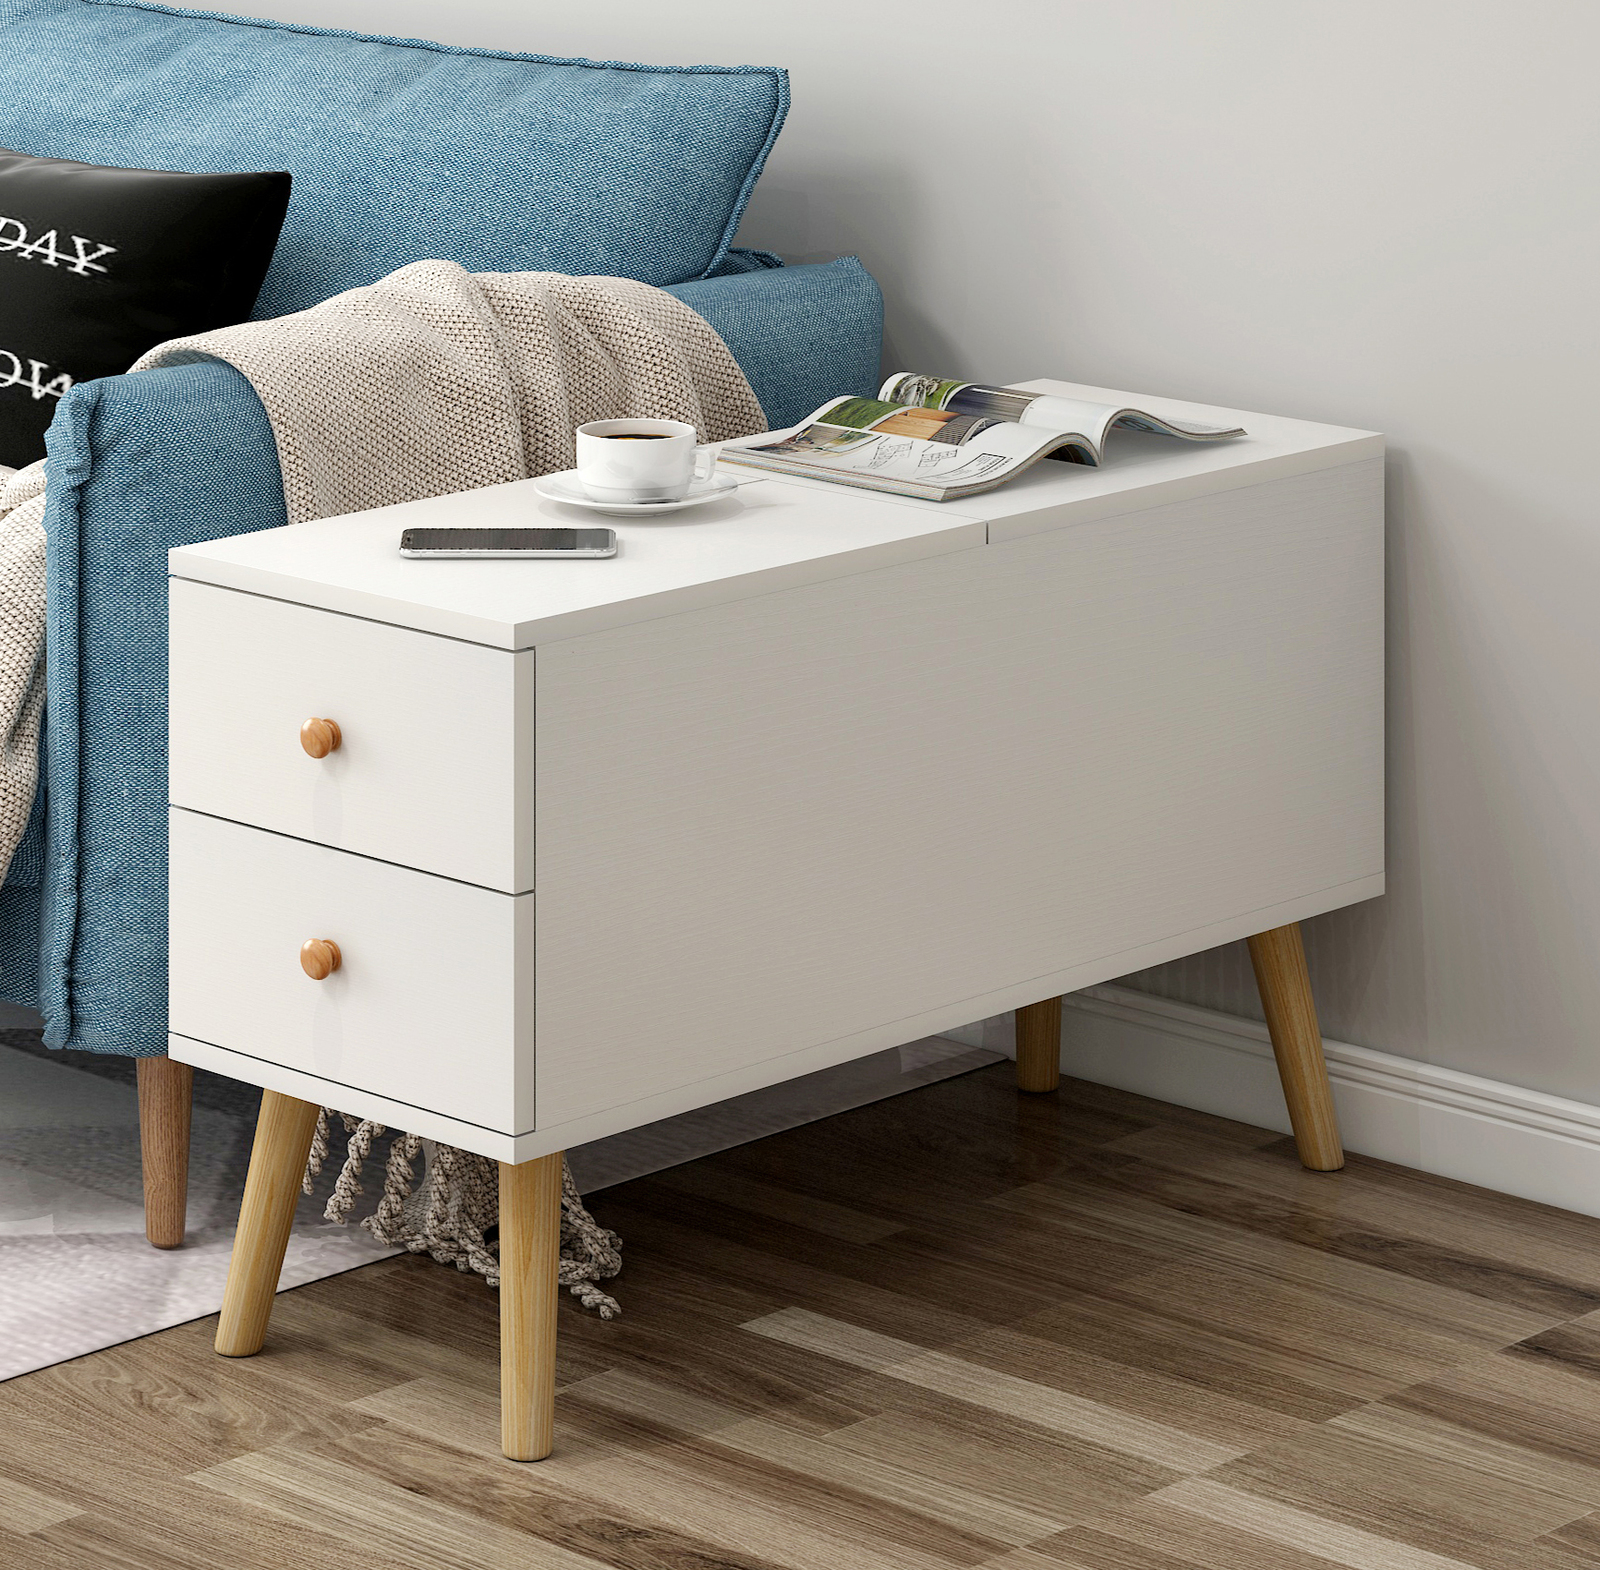 Atlantic Lift Storage Coffee Table with Drawers (White) - 90cm